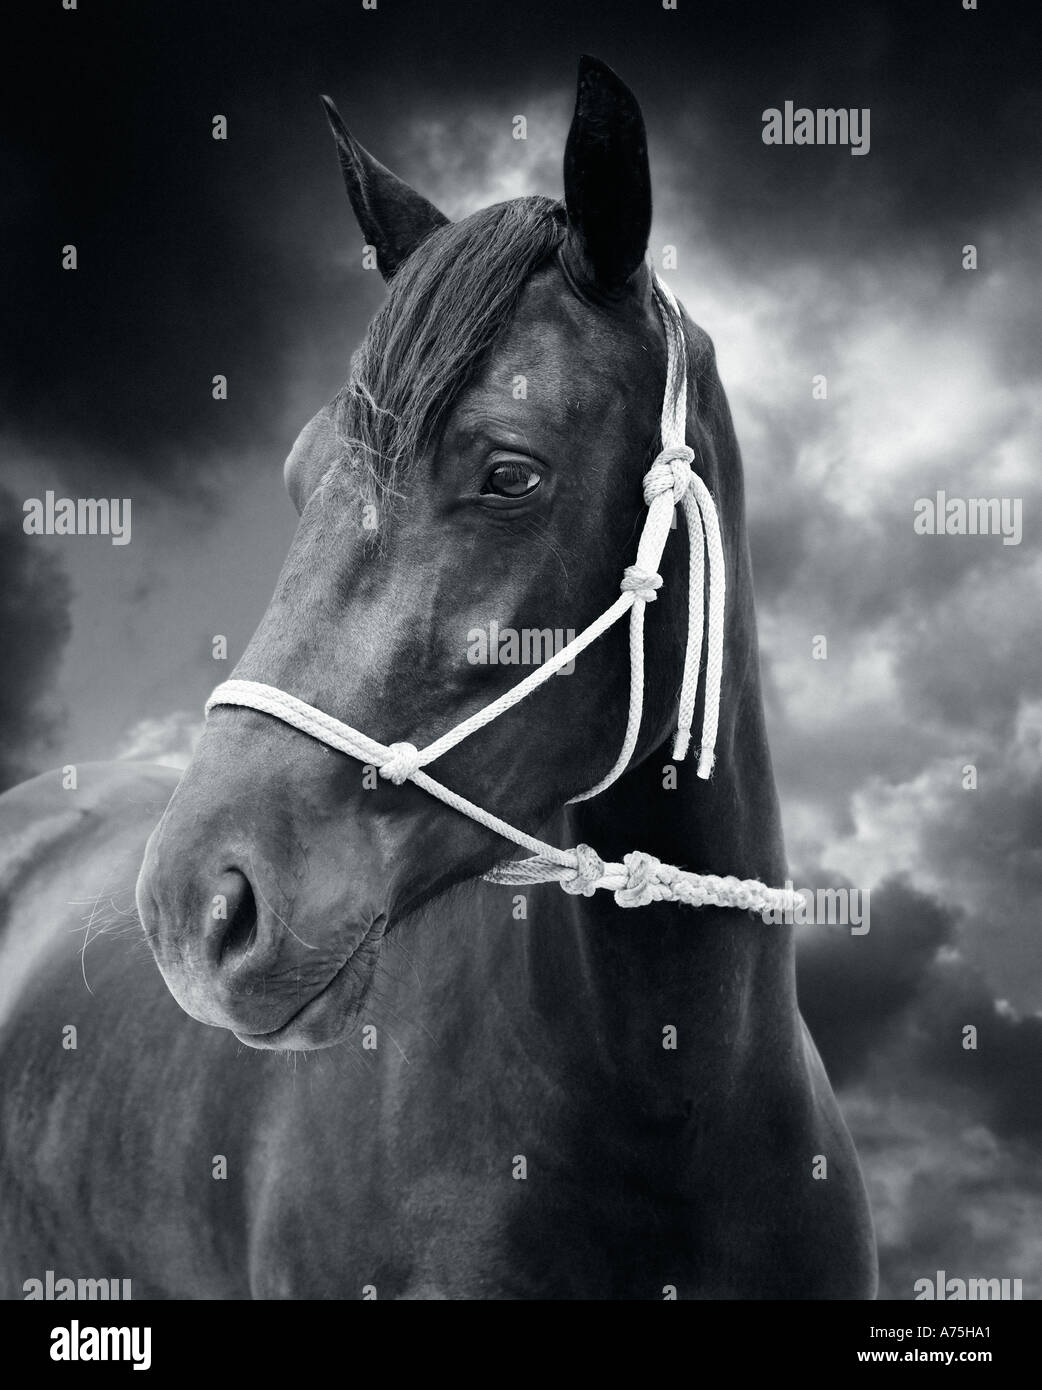 A black and white portrait of a horse with sky behind Stock Photo